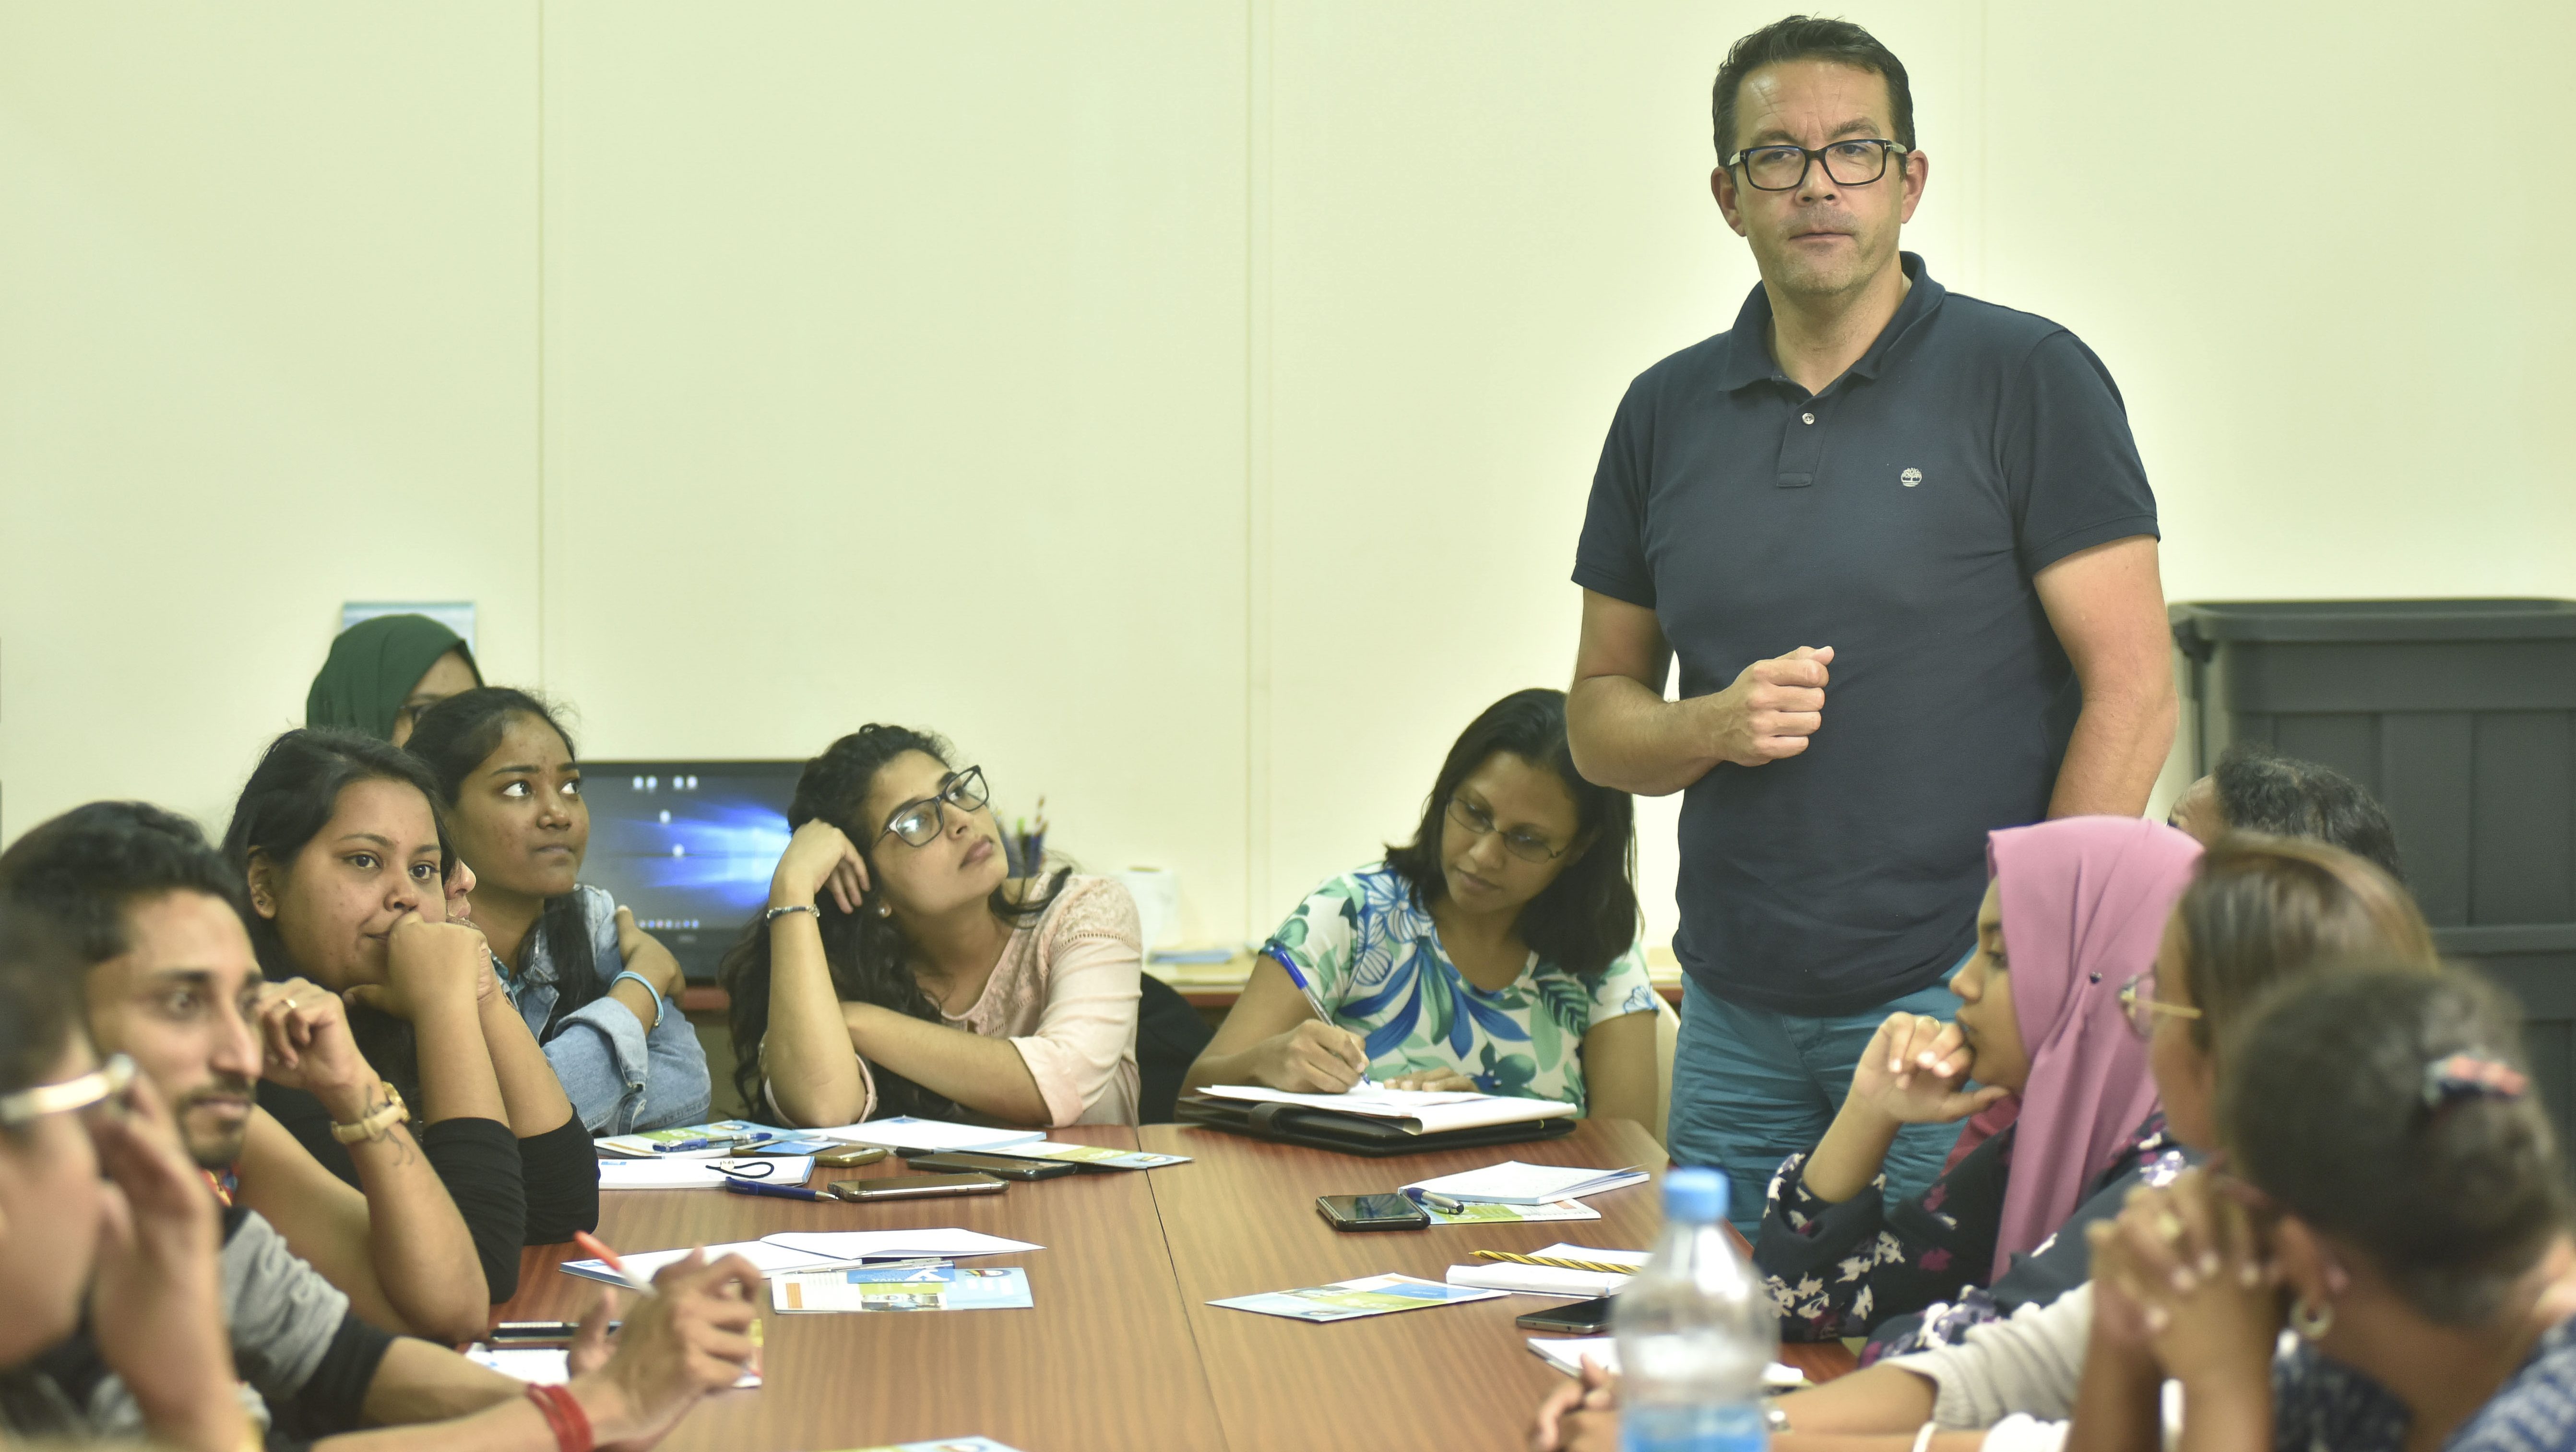 YUVA Academy begins 6th Cohort of Entrepreneurship and Leadership Programmes with 42 Participants